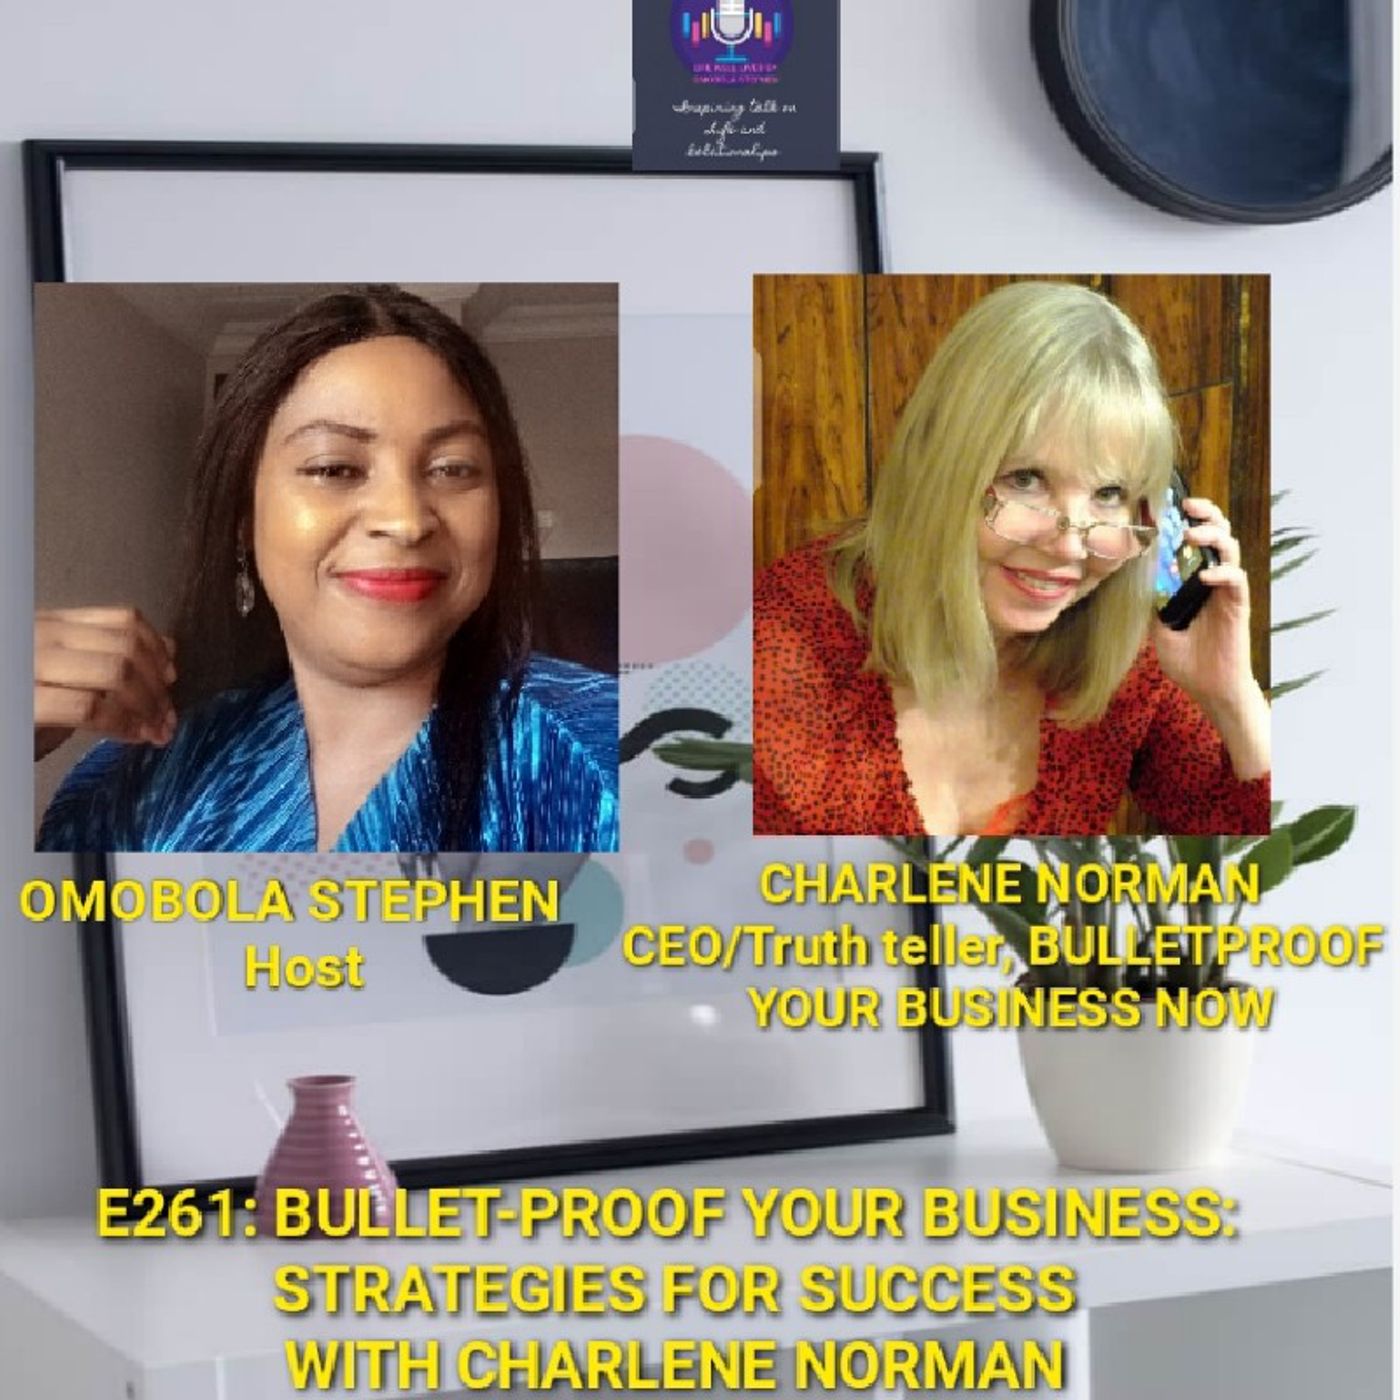 E261: Bullet-Proof Your Business: Strategies For Success With Charlene Norman